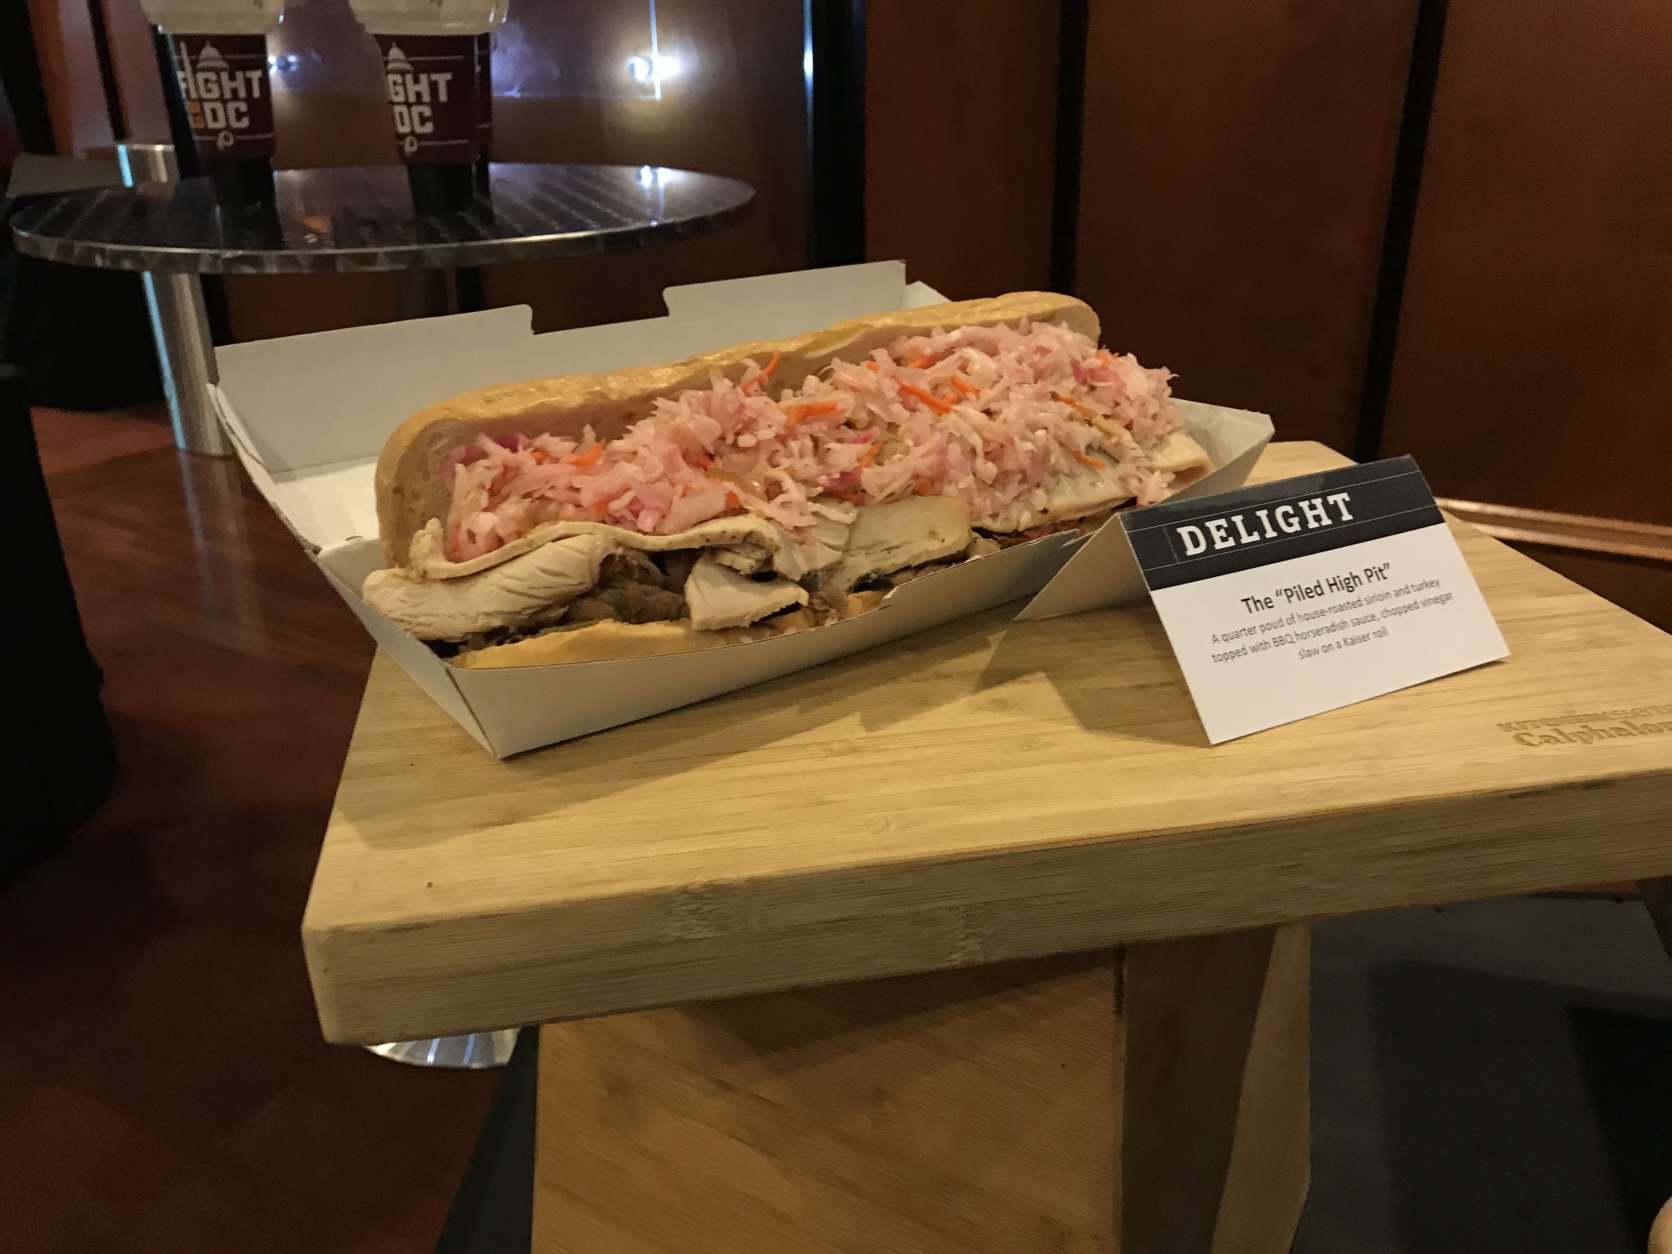 Feeling hungry at FedExField? Try the "Piled High Pit" from Skins Pit, which is more than a mouthful: a quarter pound of house-roasted sirloin and turkey topped with BBQ horseradish sauce, chopped vinegar slaw on a Kaiser roll. (WTOP/Ginger Whitaker)